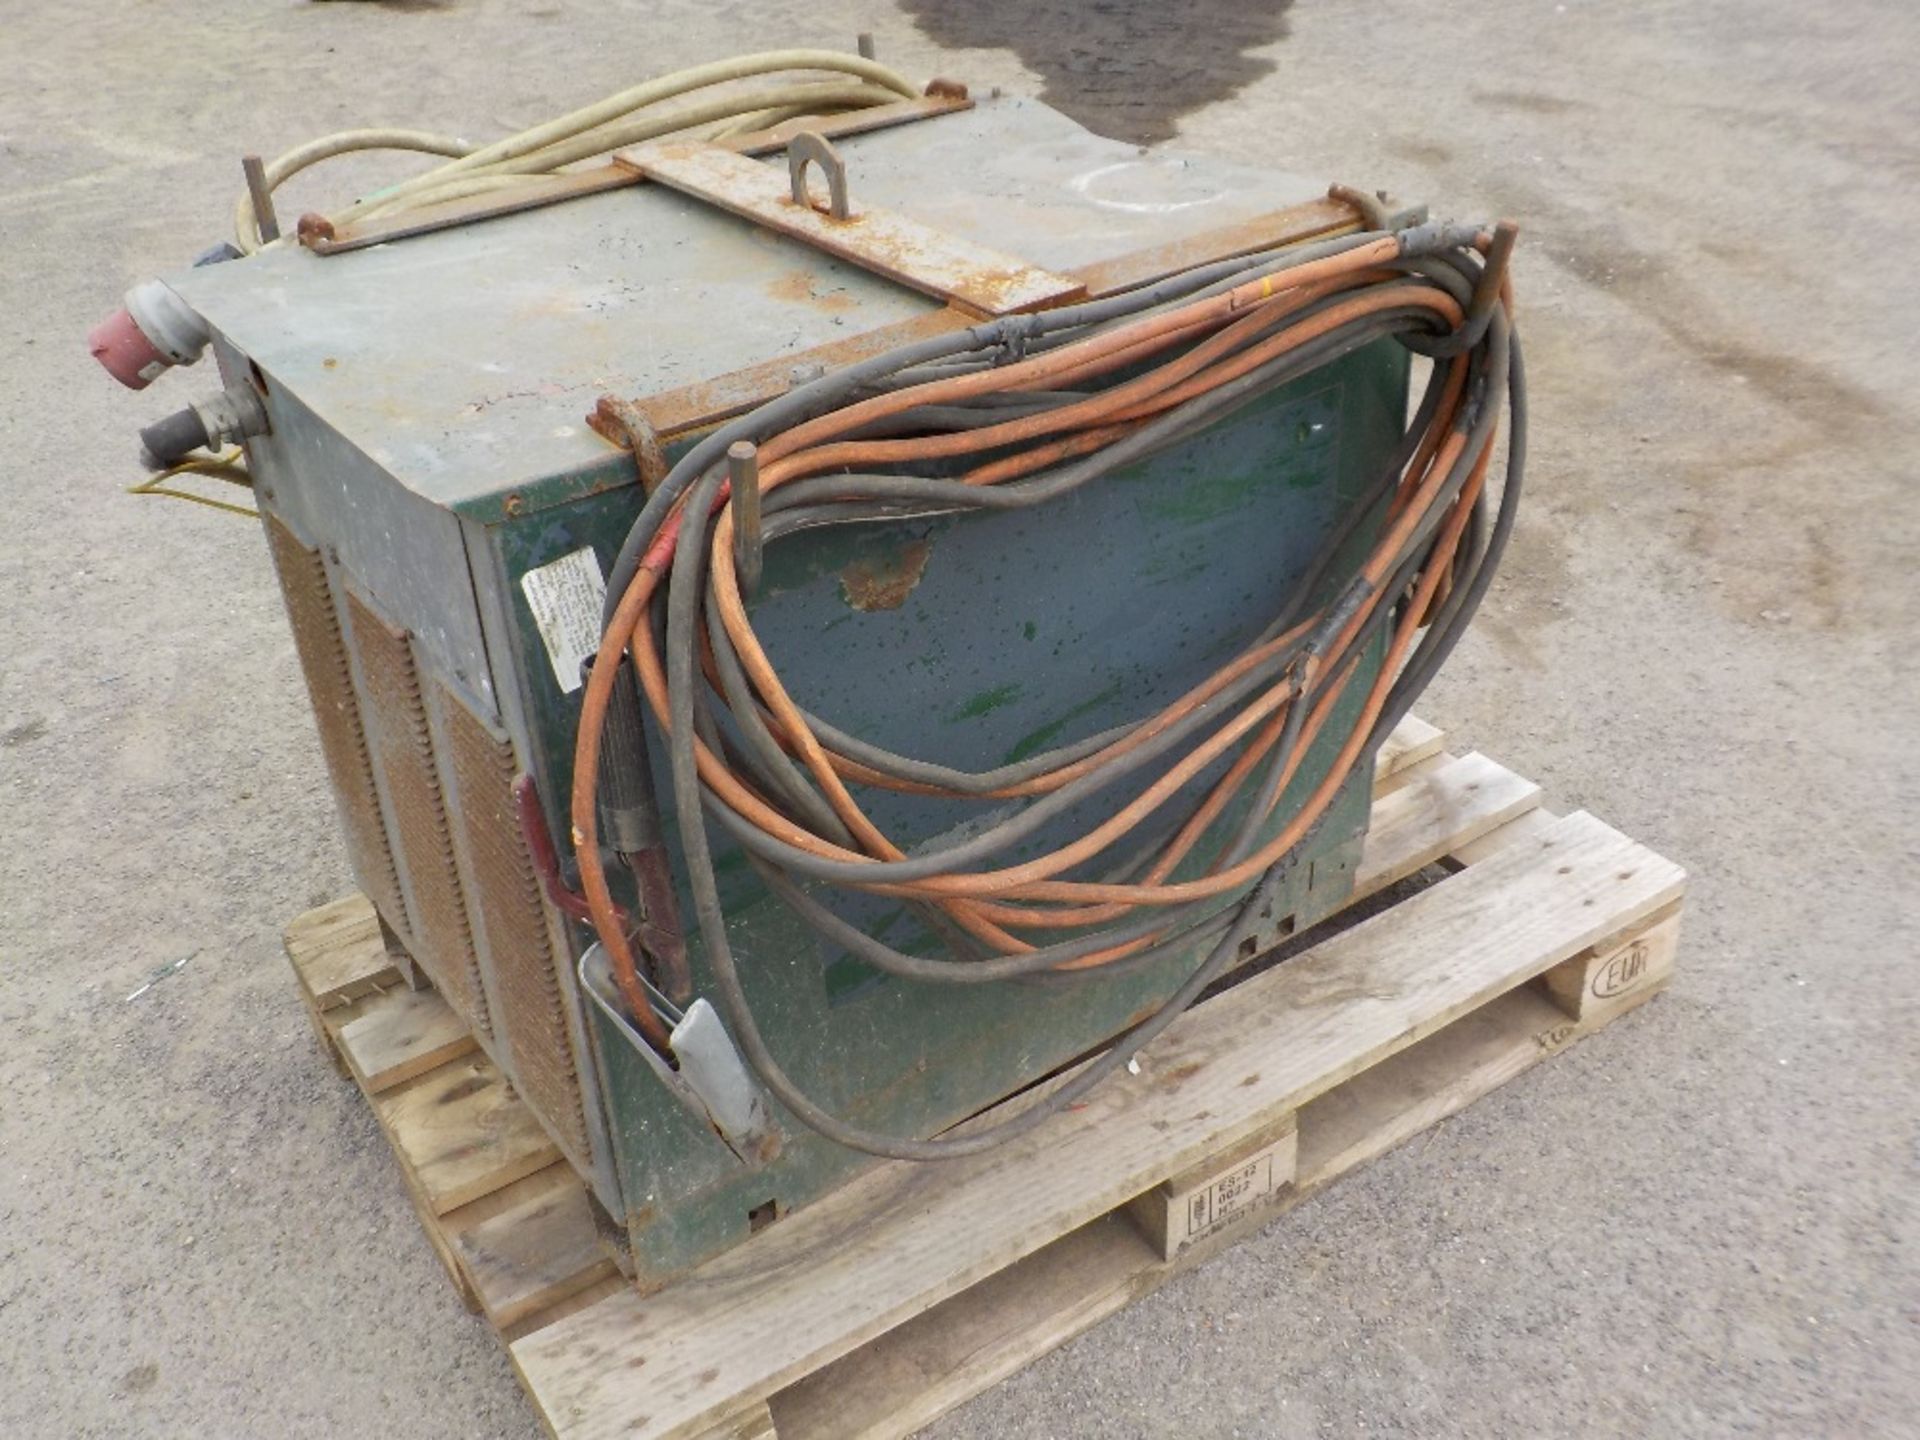 LINCOLN ELECTRIC 'IDEALARC DC400' WELDER - Image 4 of 4